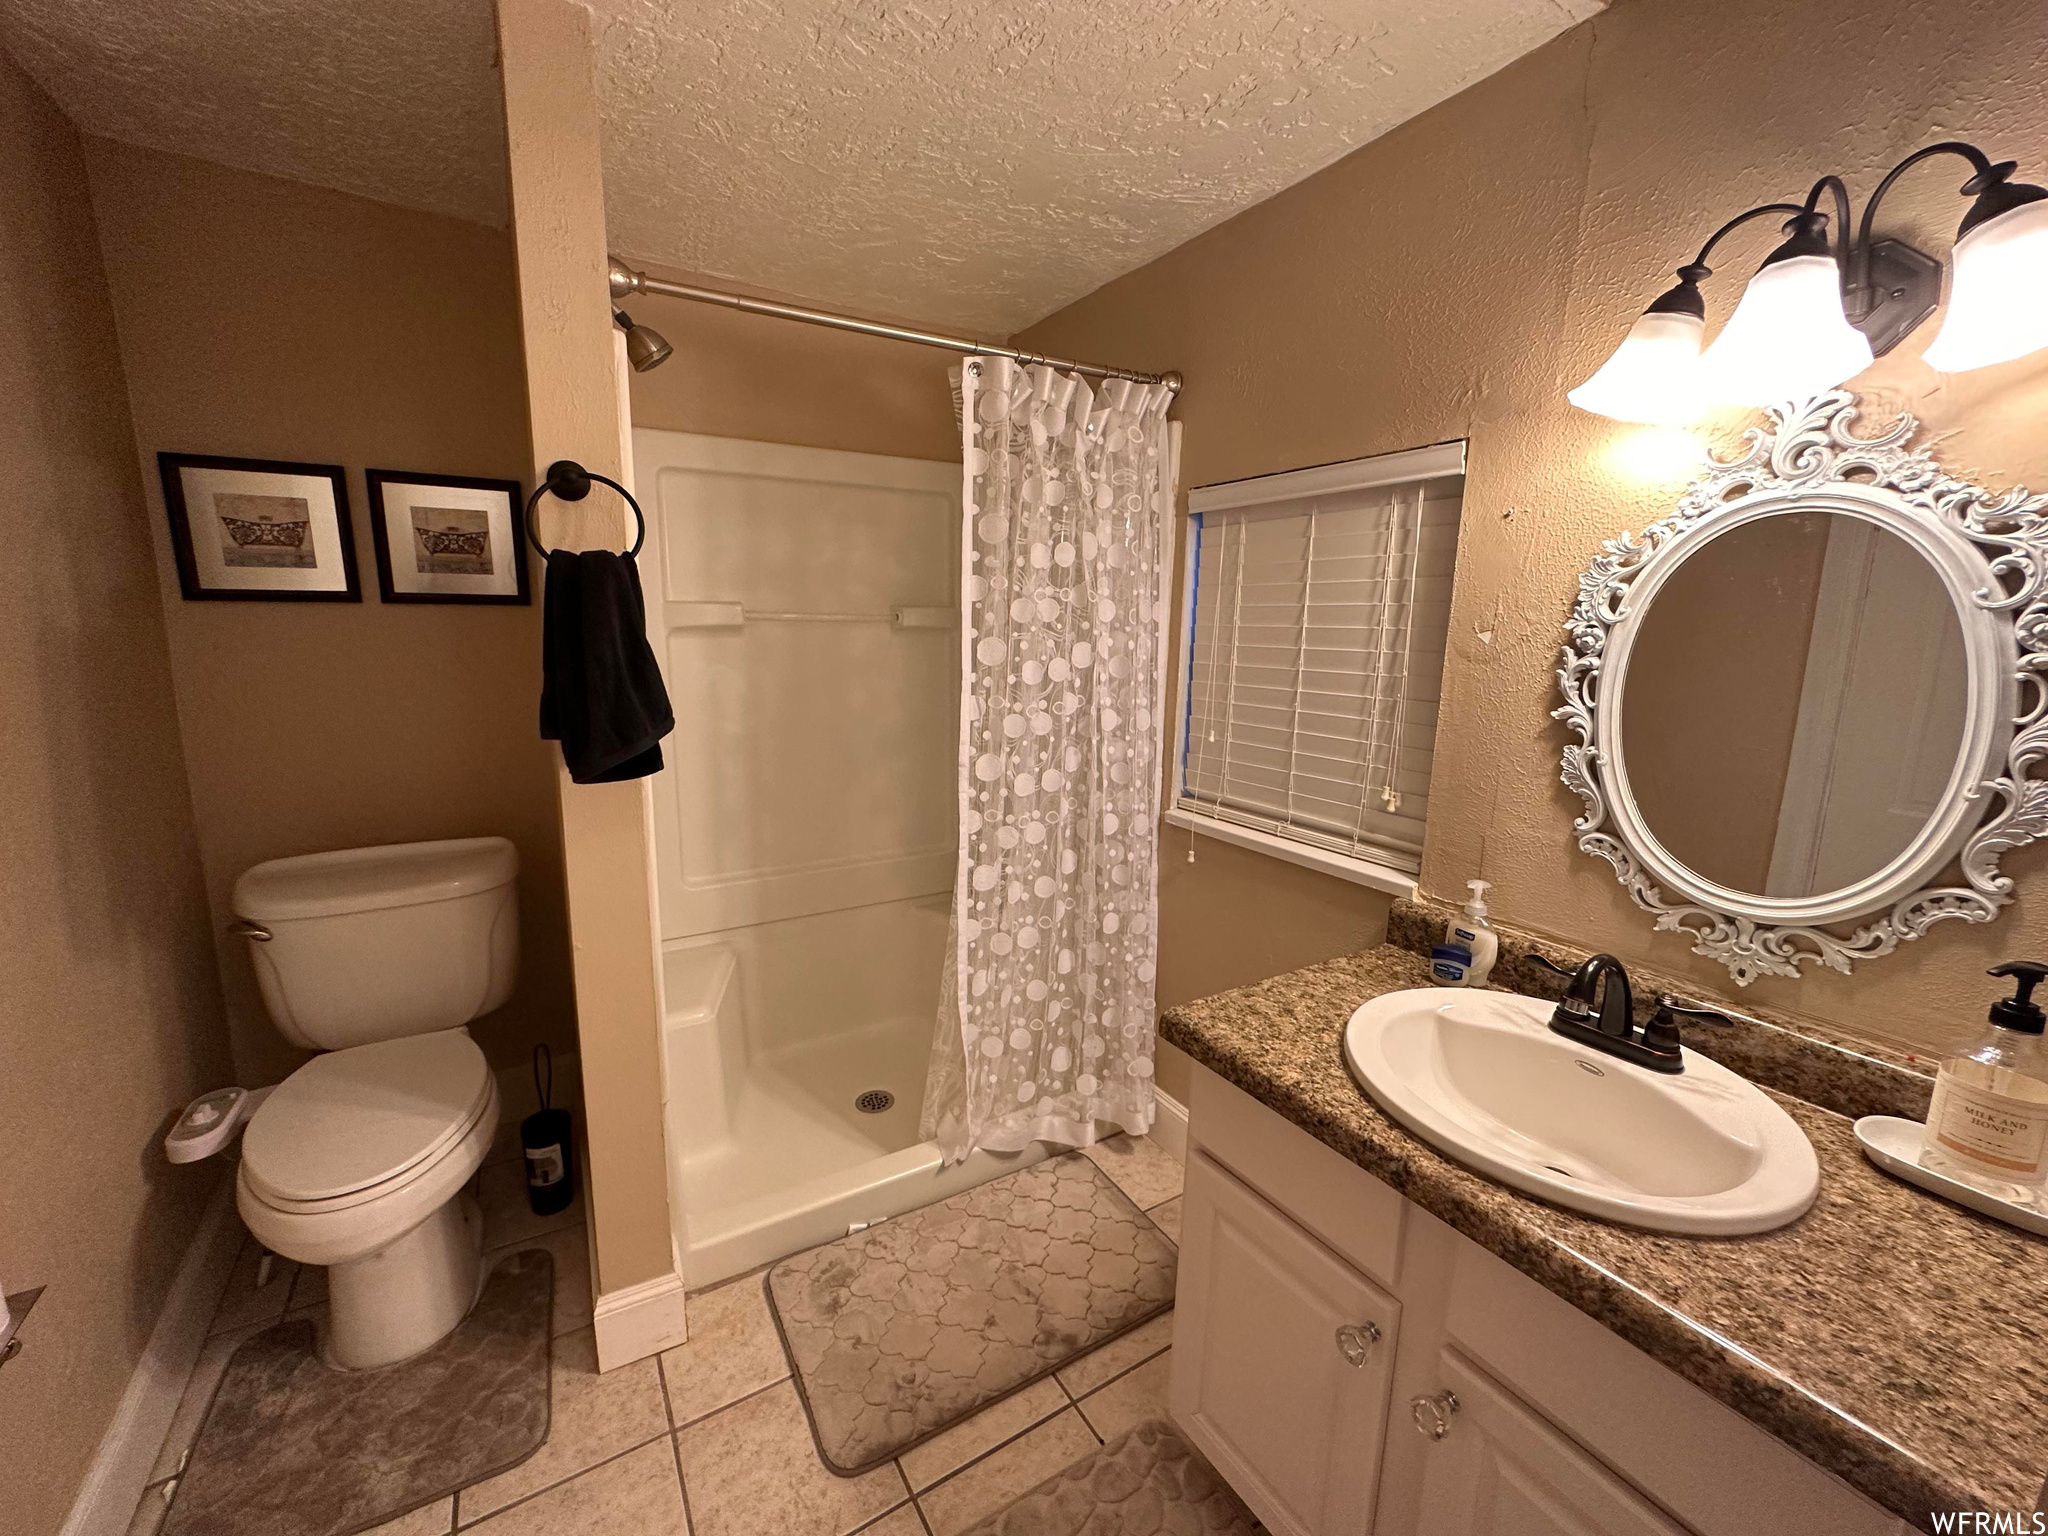 Bathroom featuring toilet, a shower with shower curtain, a textured ceiling, tile floors, and oversized vanity